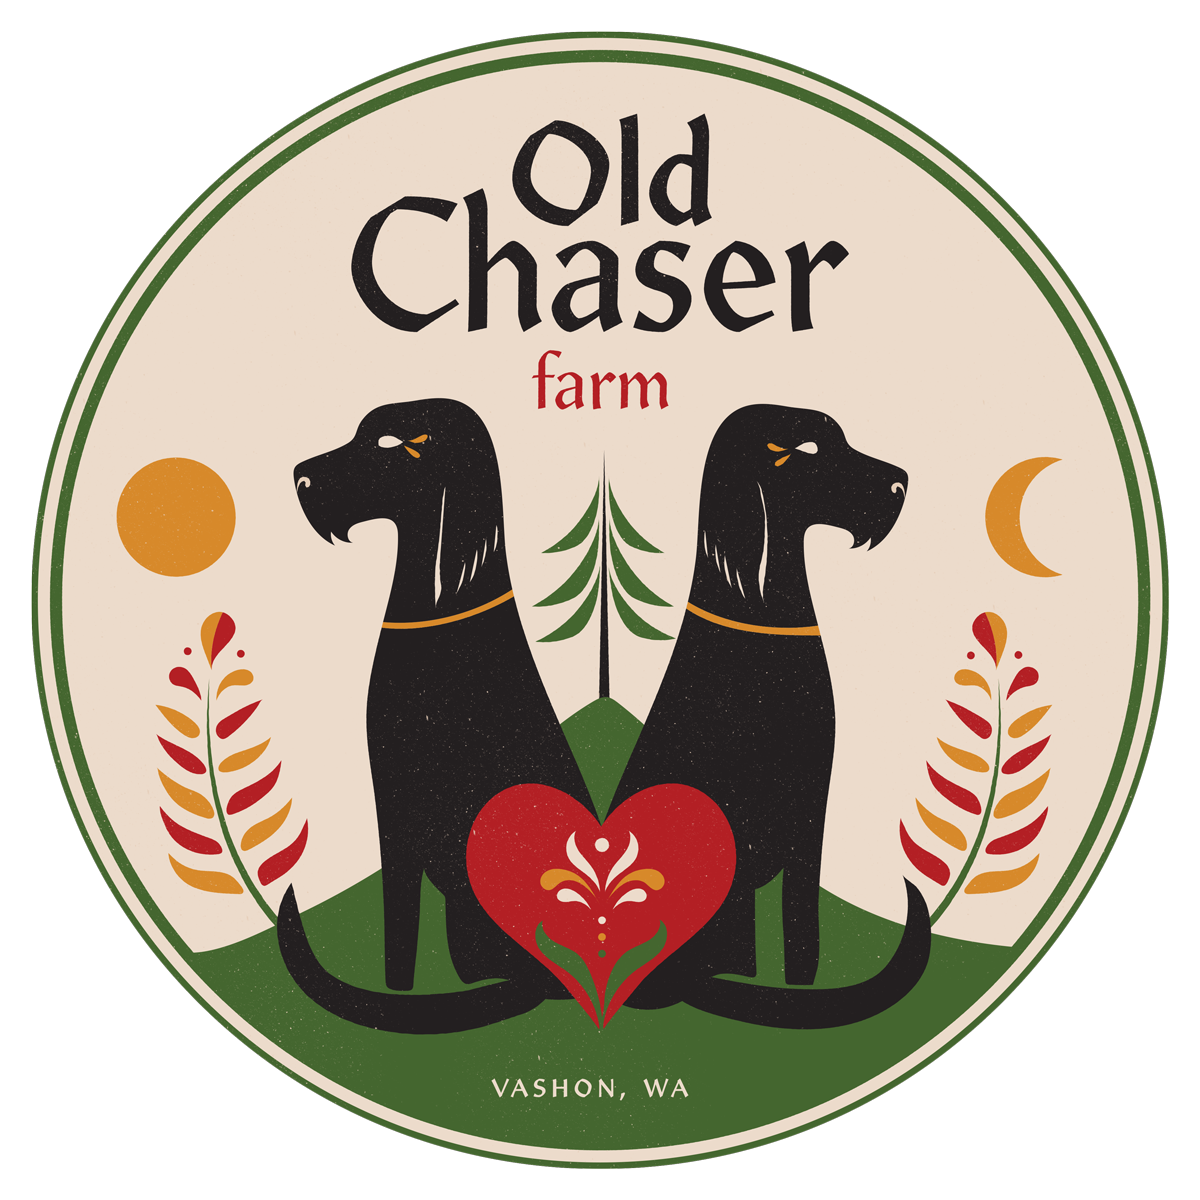 Old Chaser Farm